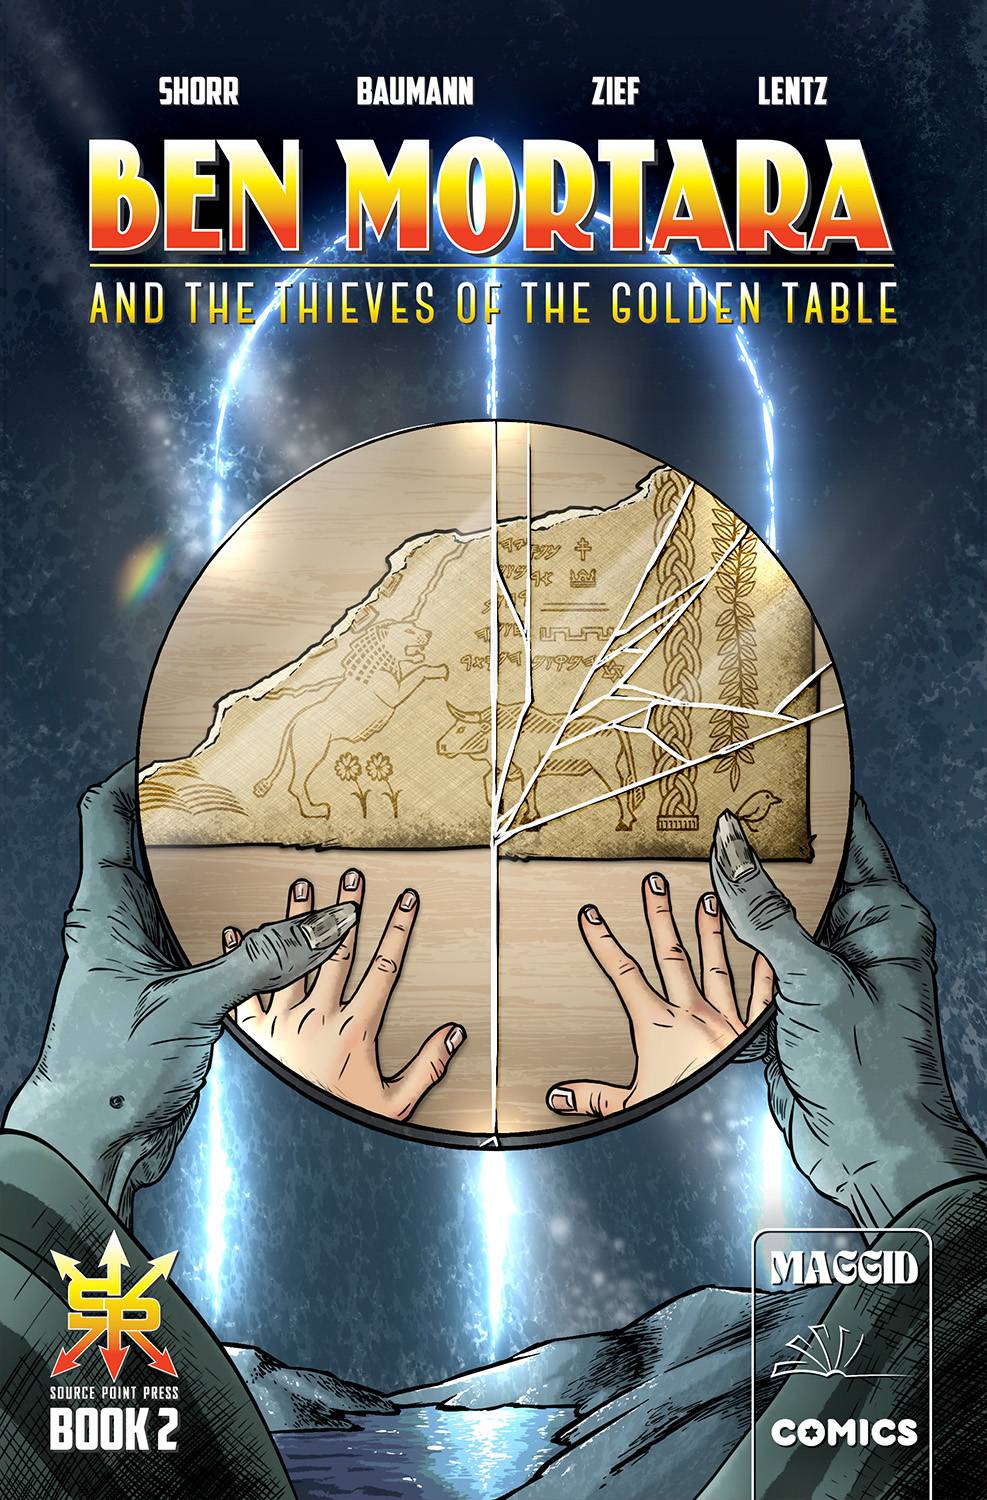 BEN MORTARA AND THIEVES OF GOLDEN TABLE #2 (OF 4) - Third Eye